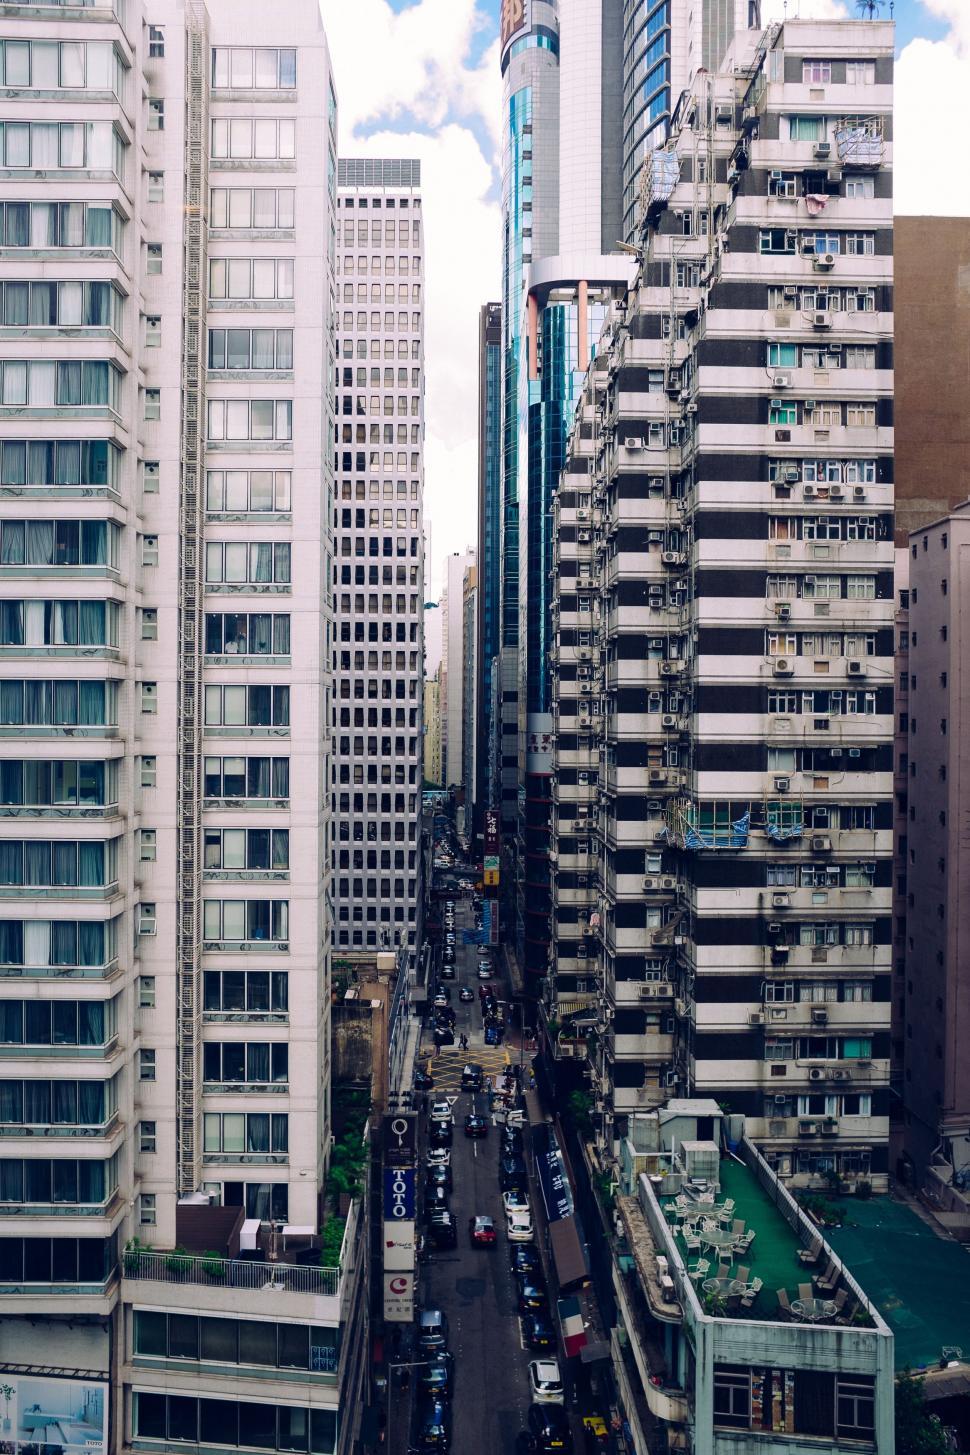 Free Image of City Street Filled With Tall Buildings 